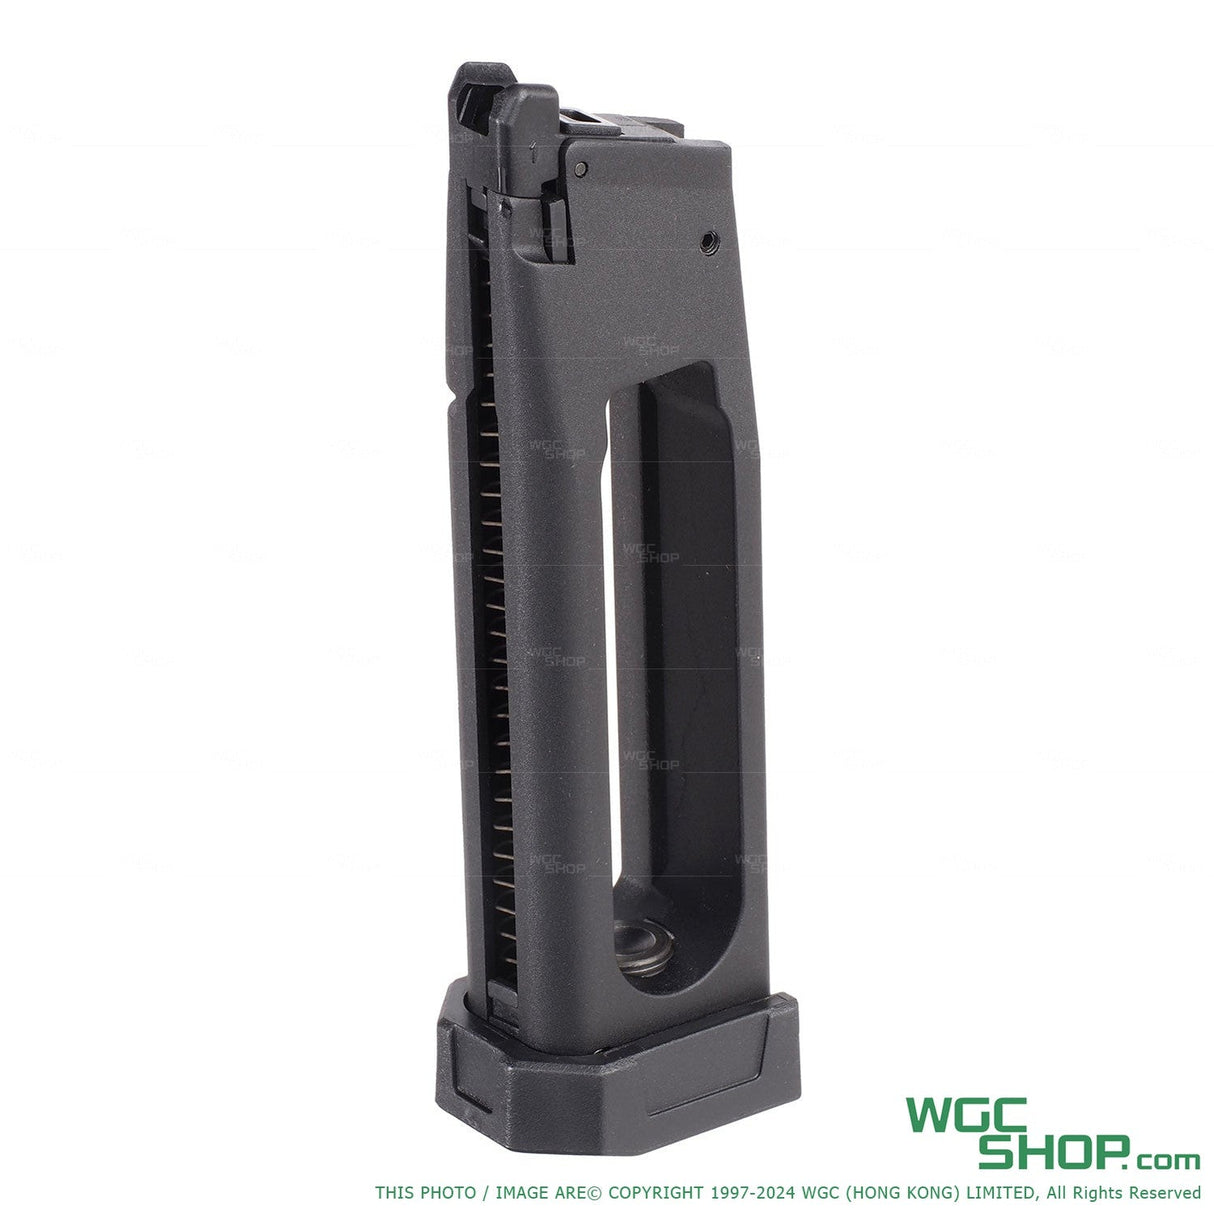 KJ WORKS KP-19 25Rds CO2 Airsoft Magazine